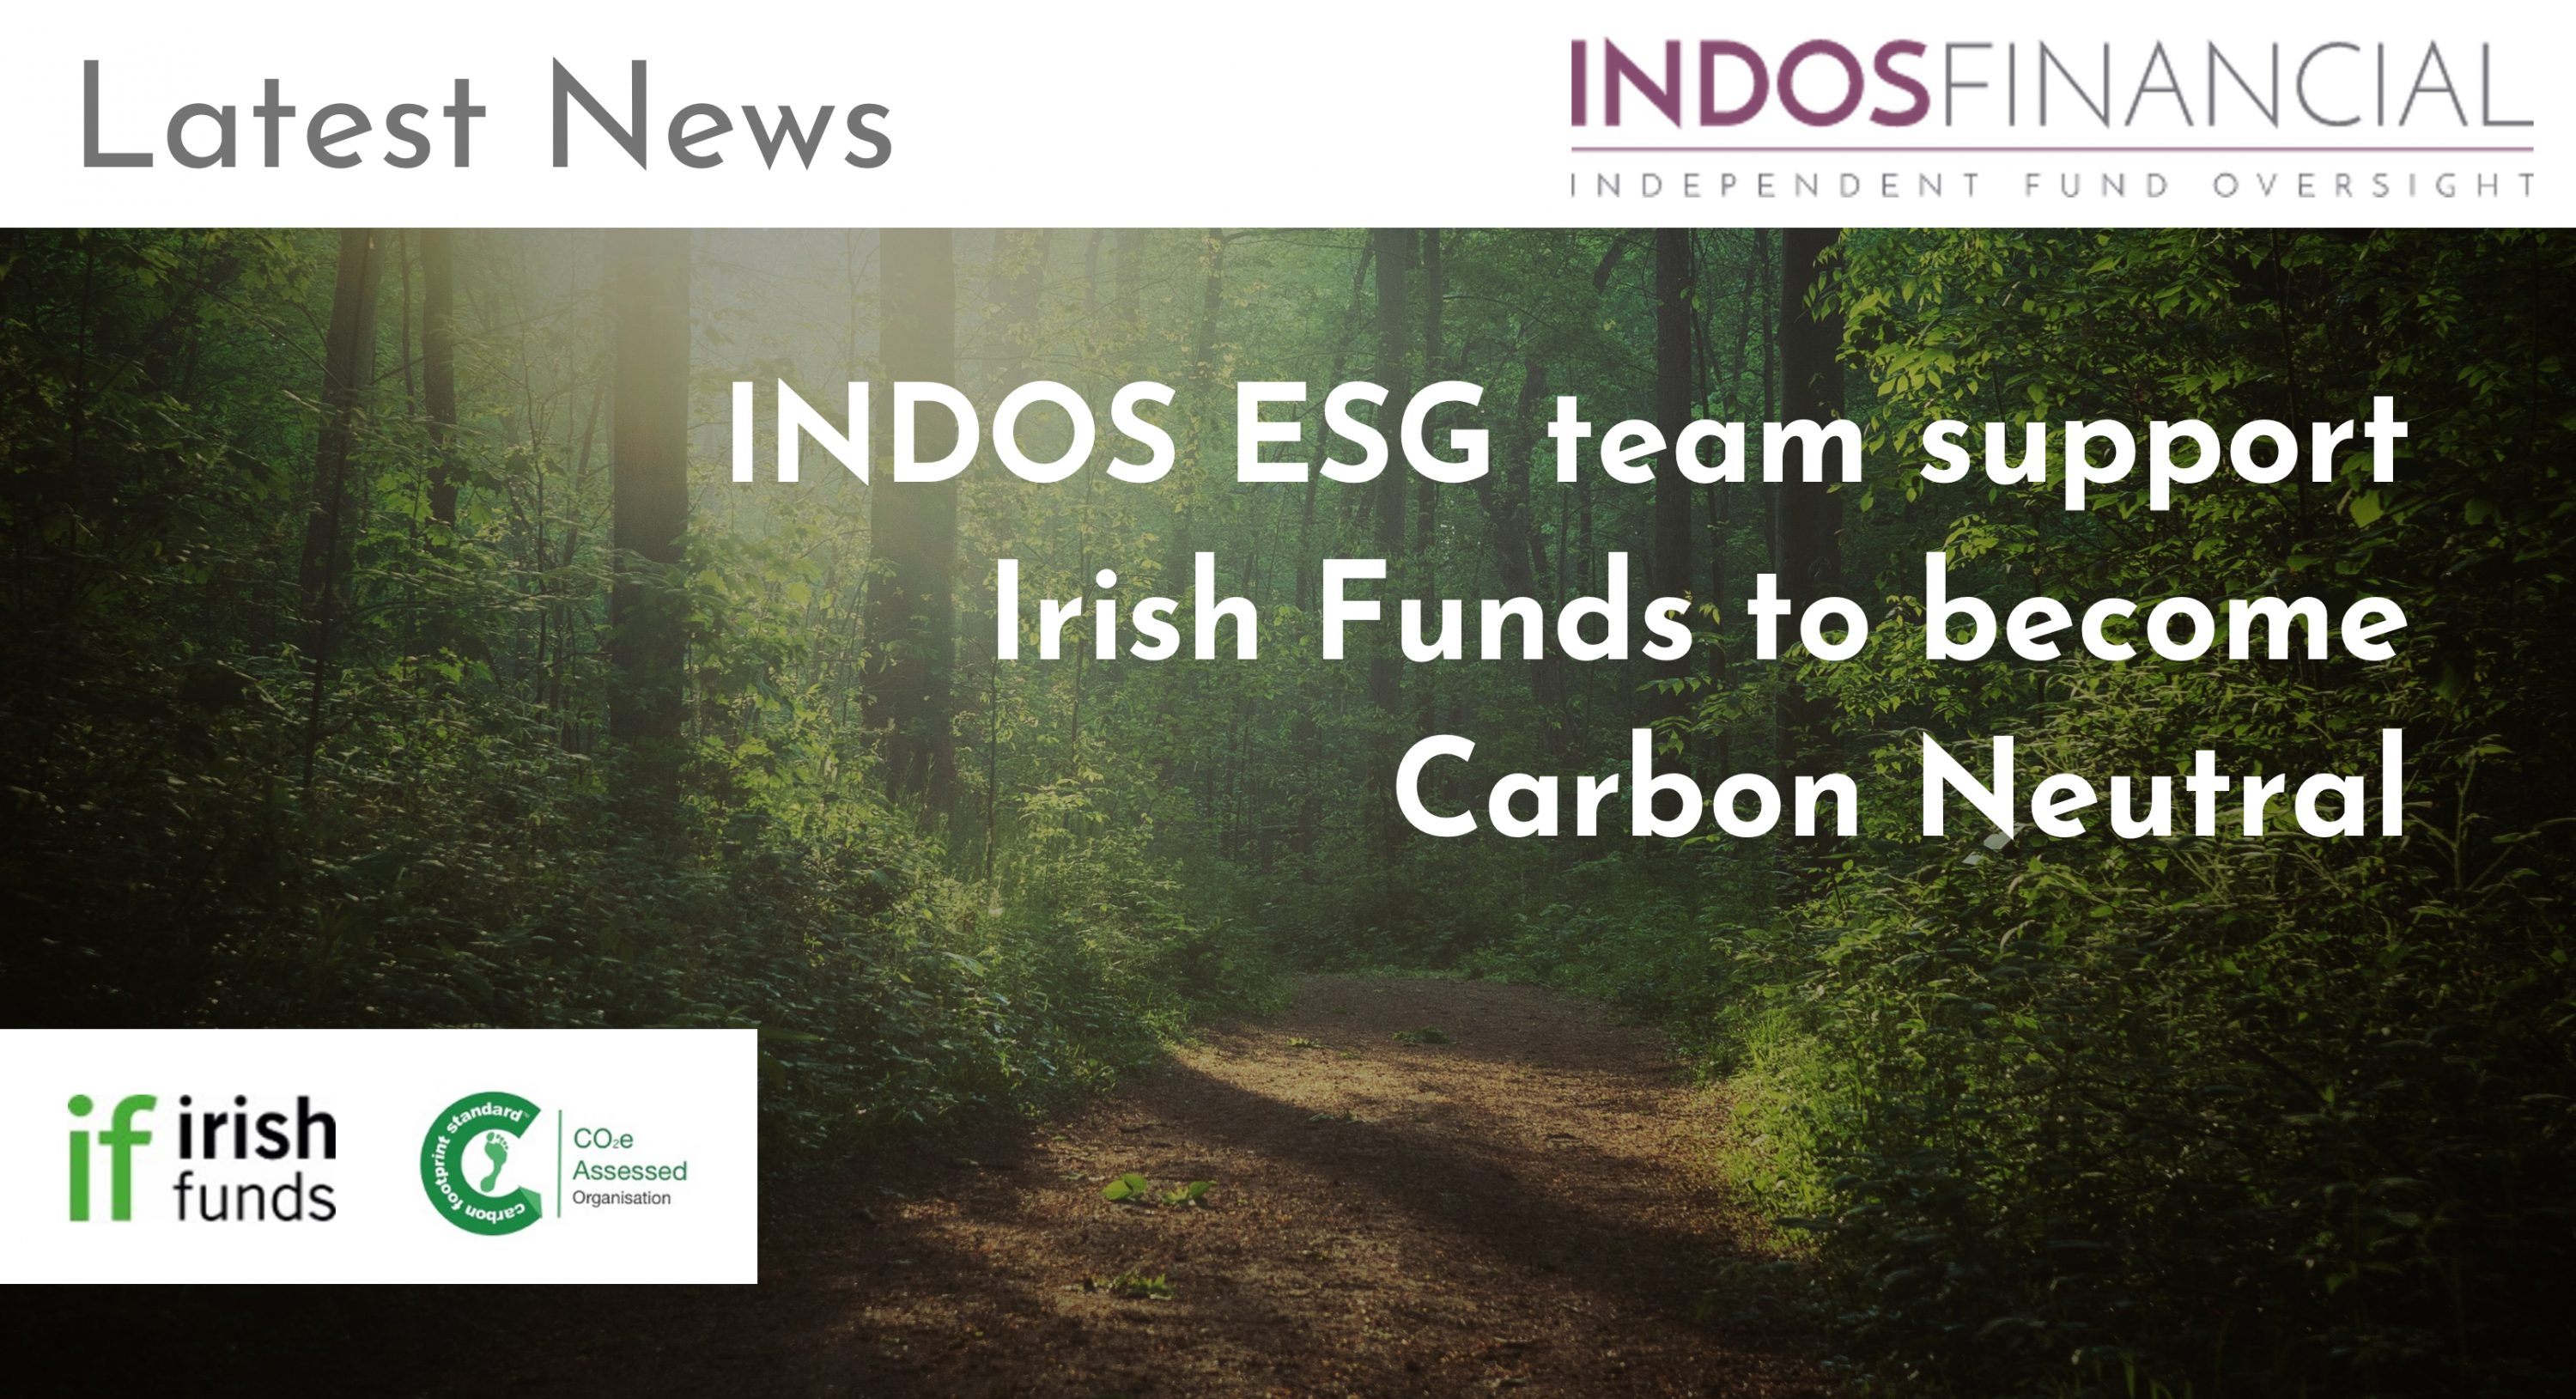 Irish-Funds-Carbon-Neutral-scaled